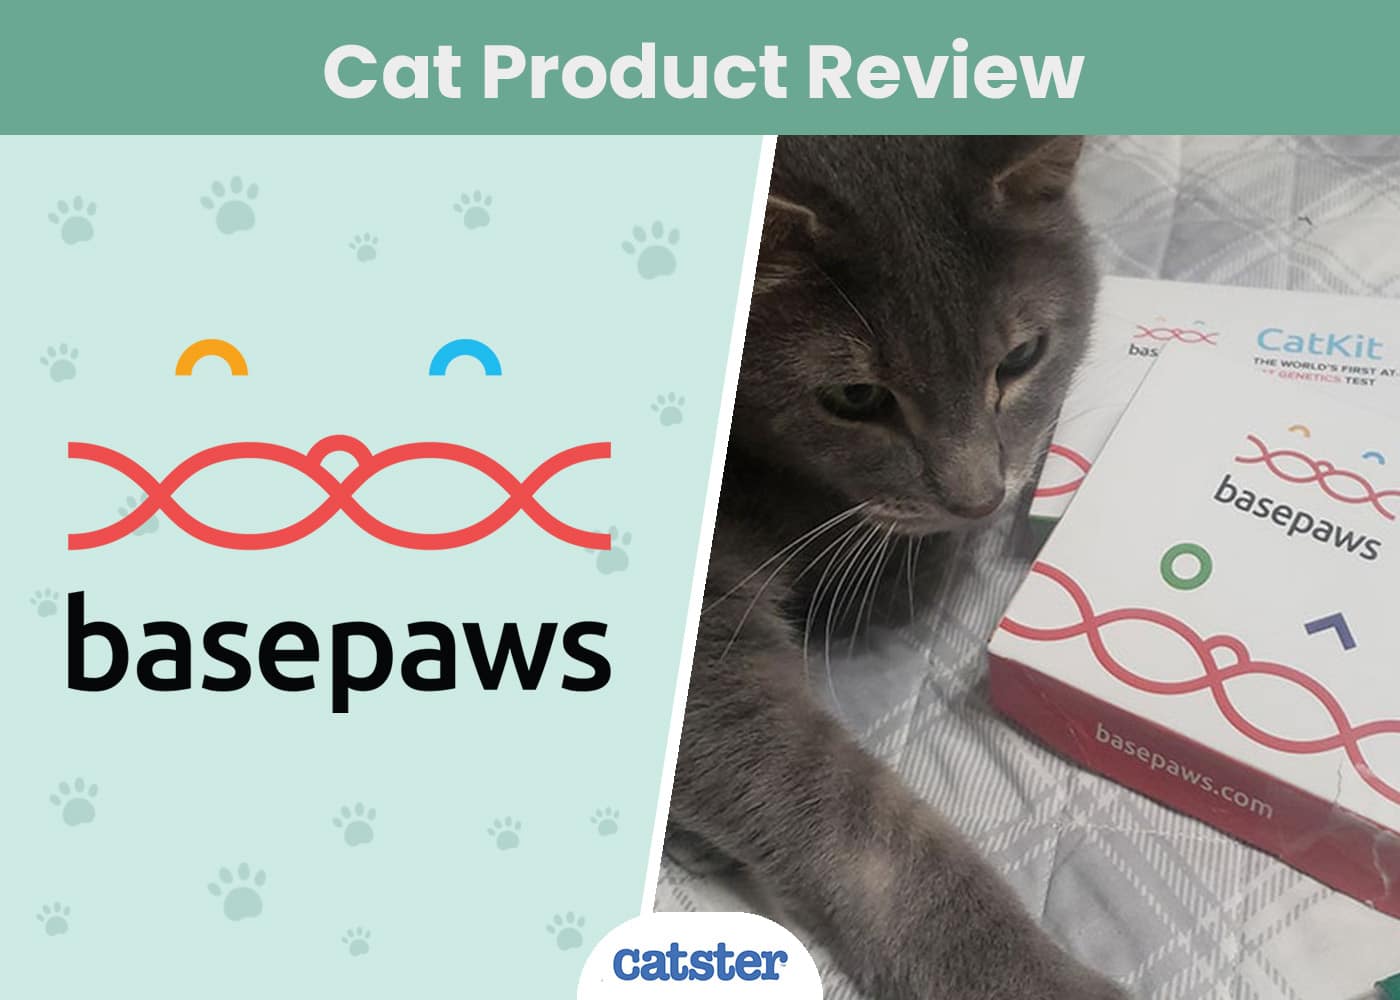 basepaws featured image catster